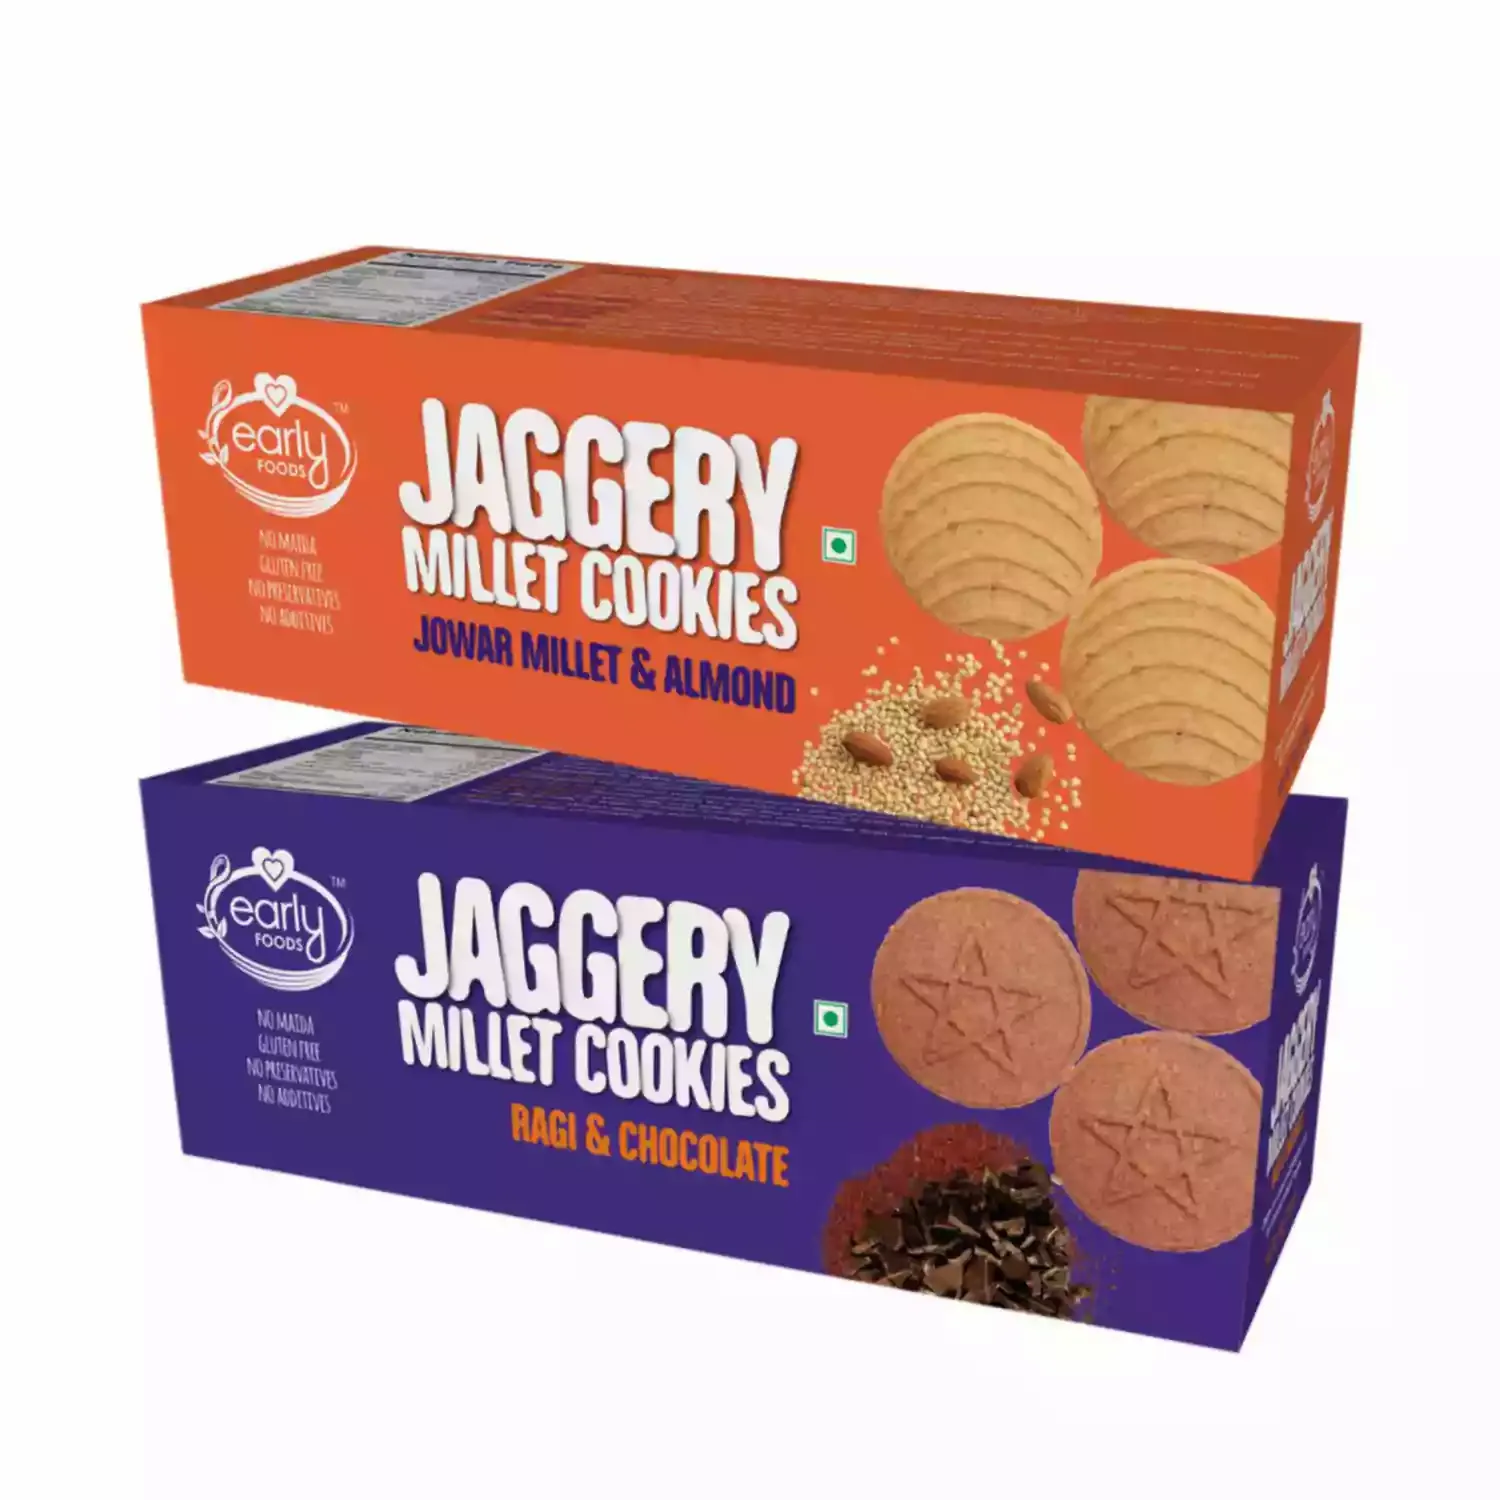 Early Foods and Assorted Pack of 2 Jowar Ragi Choco Jaggery Cookies X 2 150g each